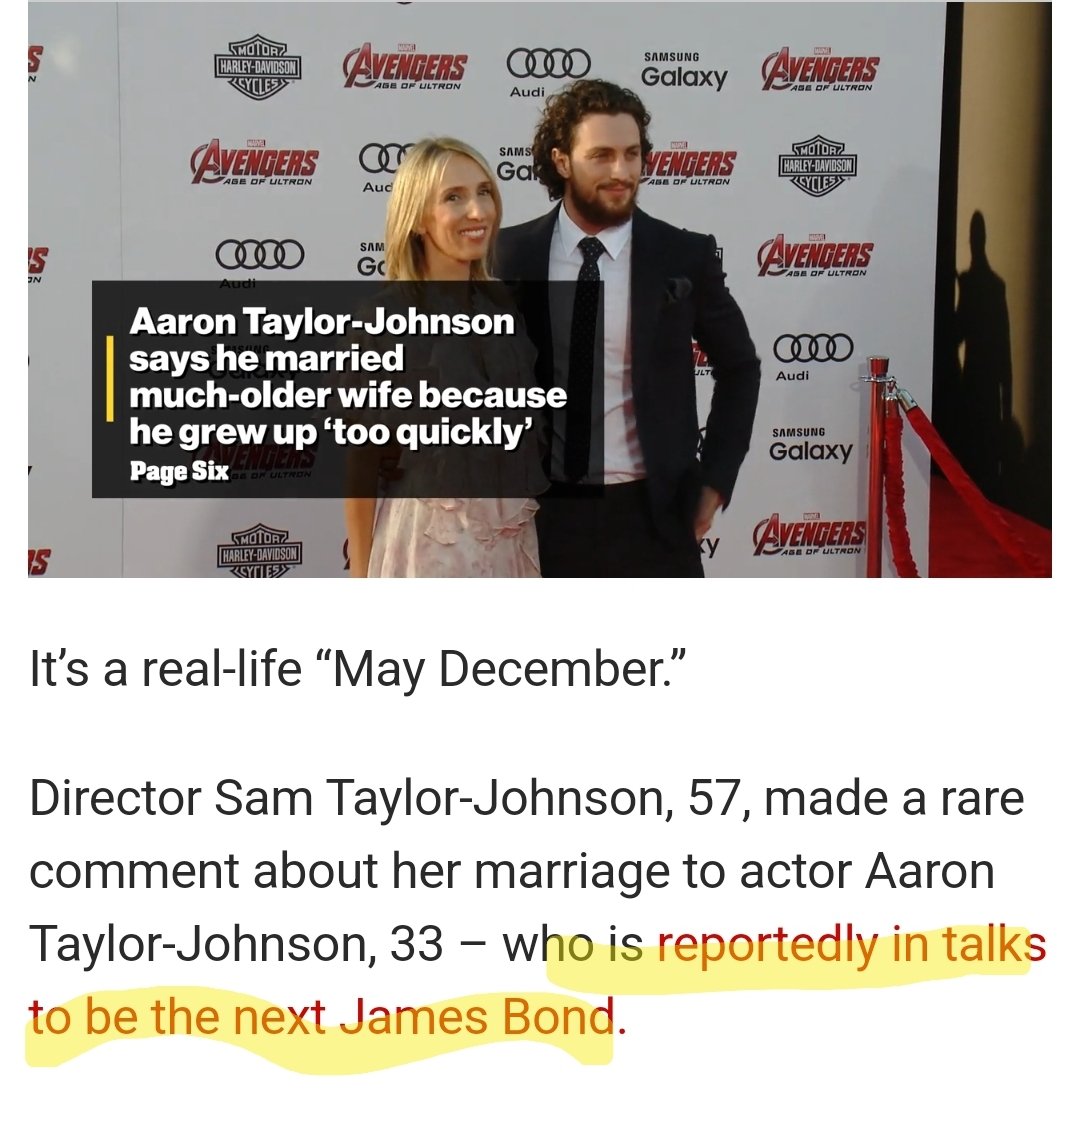 I got molested in this timeline, no wife,no career, Aaron Taylor Johnson gets molested he gets a wife and a career, where's the justice??